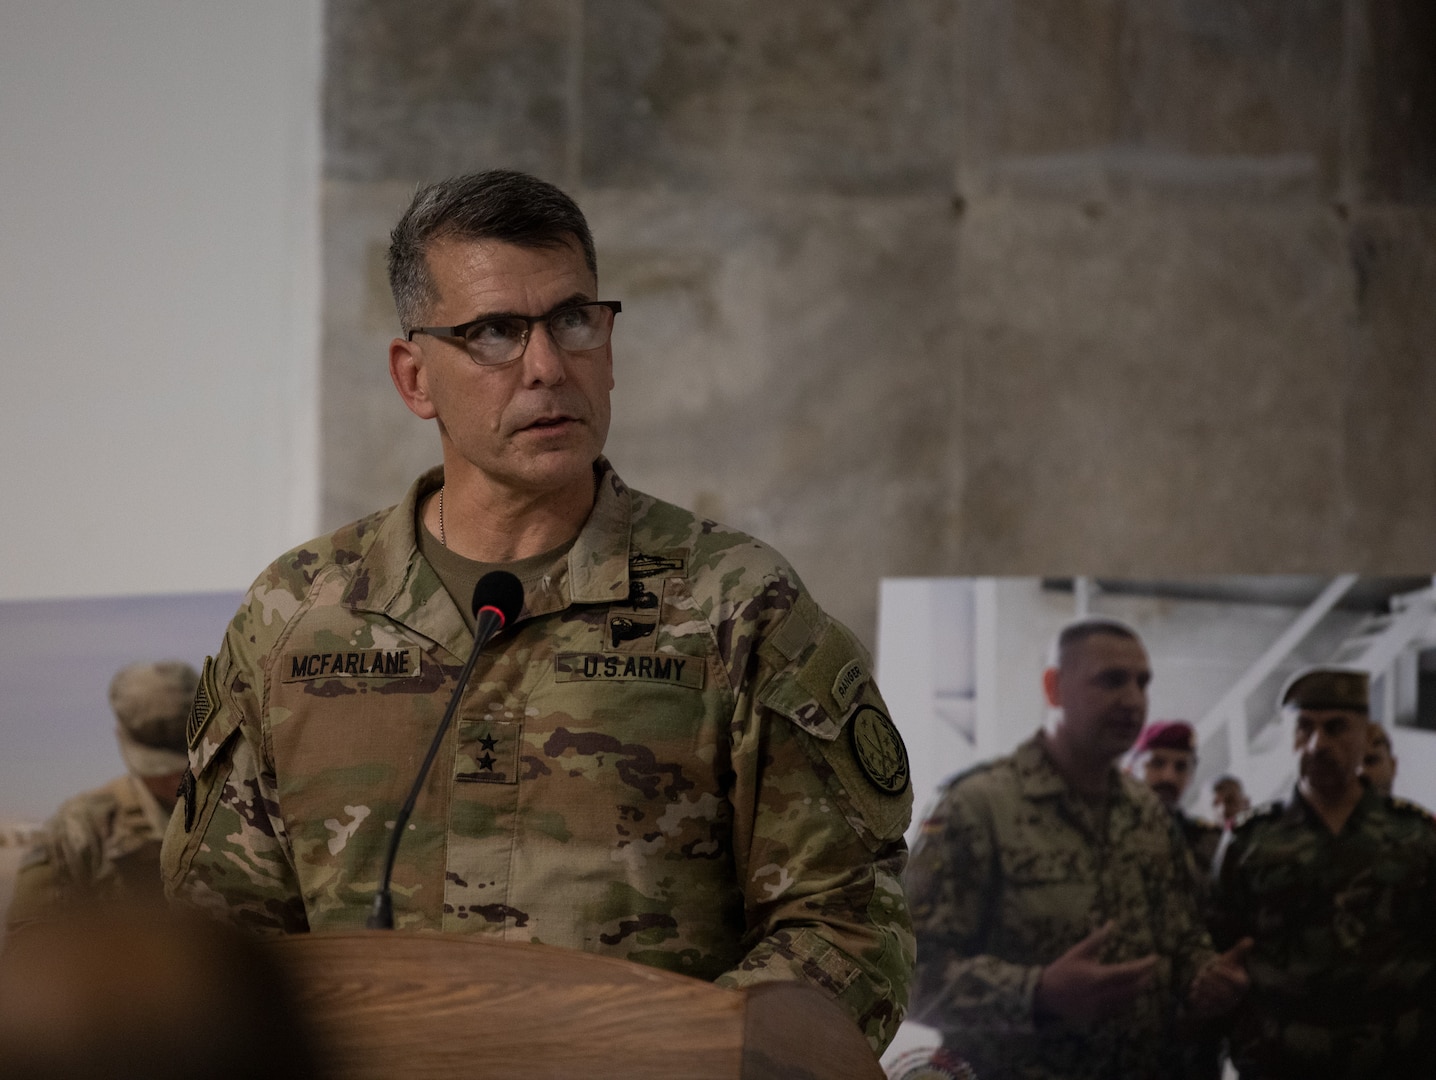 U.S. Army Maj. Gen. Matthew McFarlane, commander of Combined Joint Task Force - Operation Inherent Resolve, speaks during a transfer of authority ceremony at Baghdad, Iraq, Sep. 8, 2022. CJTF-OIR remains steadfast in its commitment to support partner forces in designated areas of Iraq and Syria as they secure the enduring defeat of Da’esh and prevent the group’s reemergence. (U.S Army photo by Sgt. Julio Hernandez)